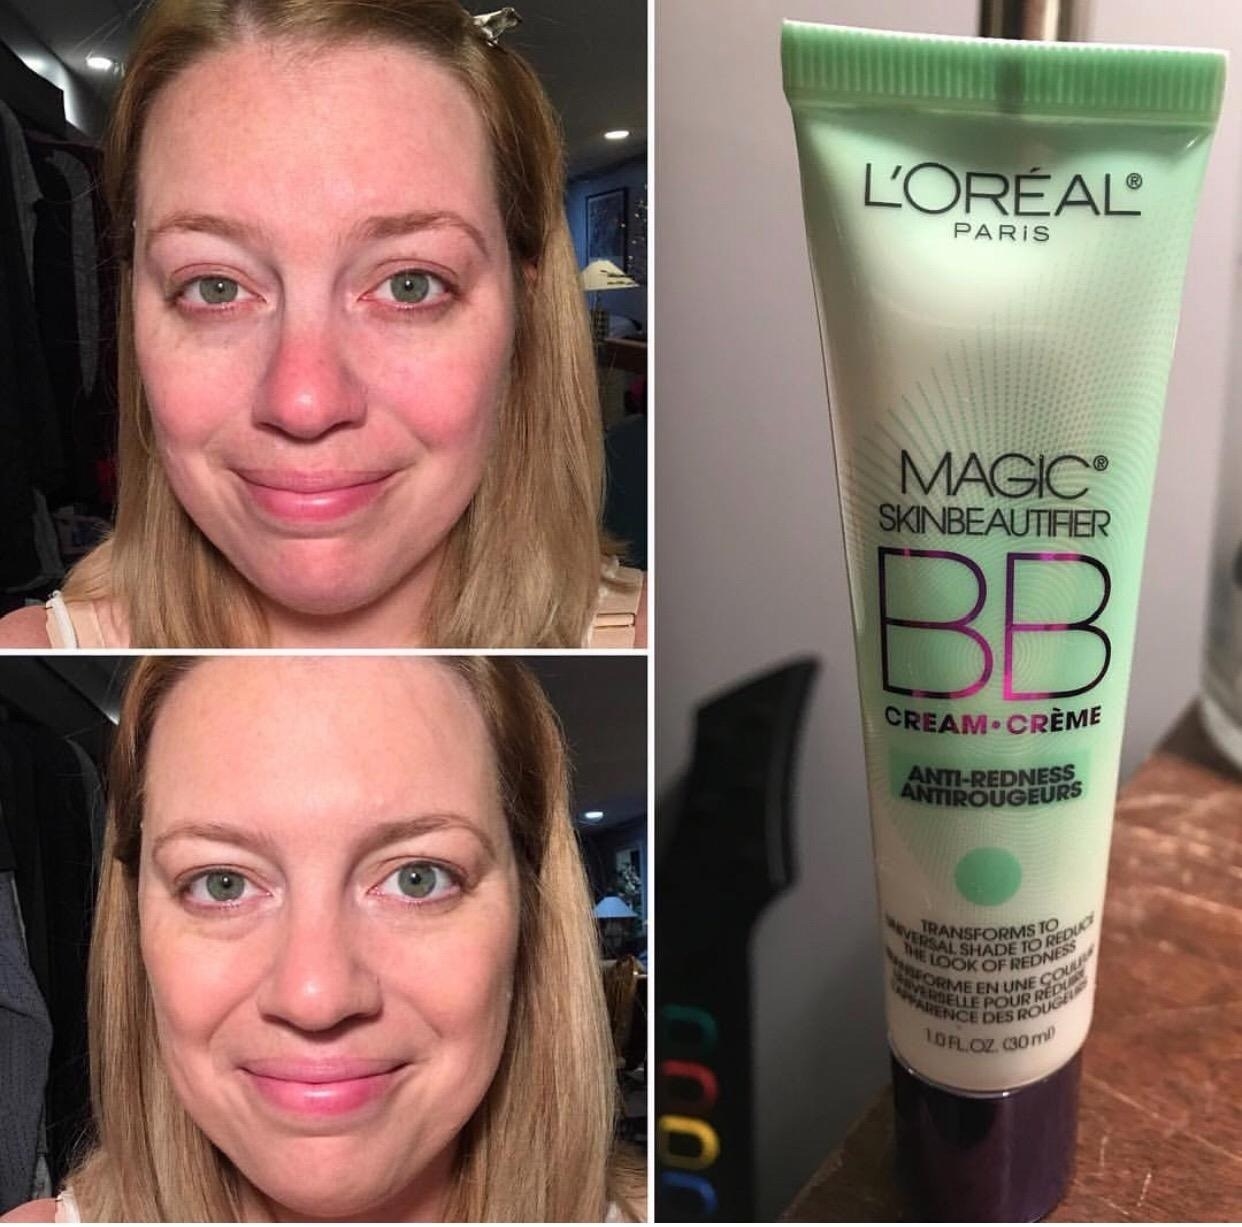 reviewer showing a before image with red skin and an after image with less red skin plus the bottle of cream